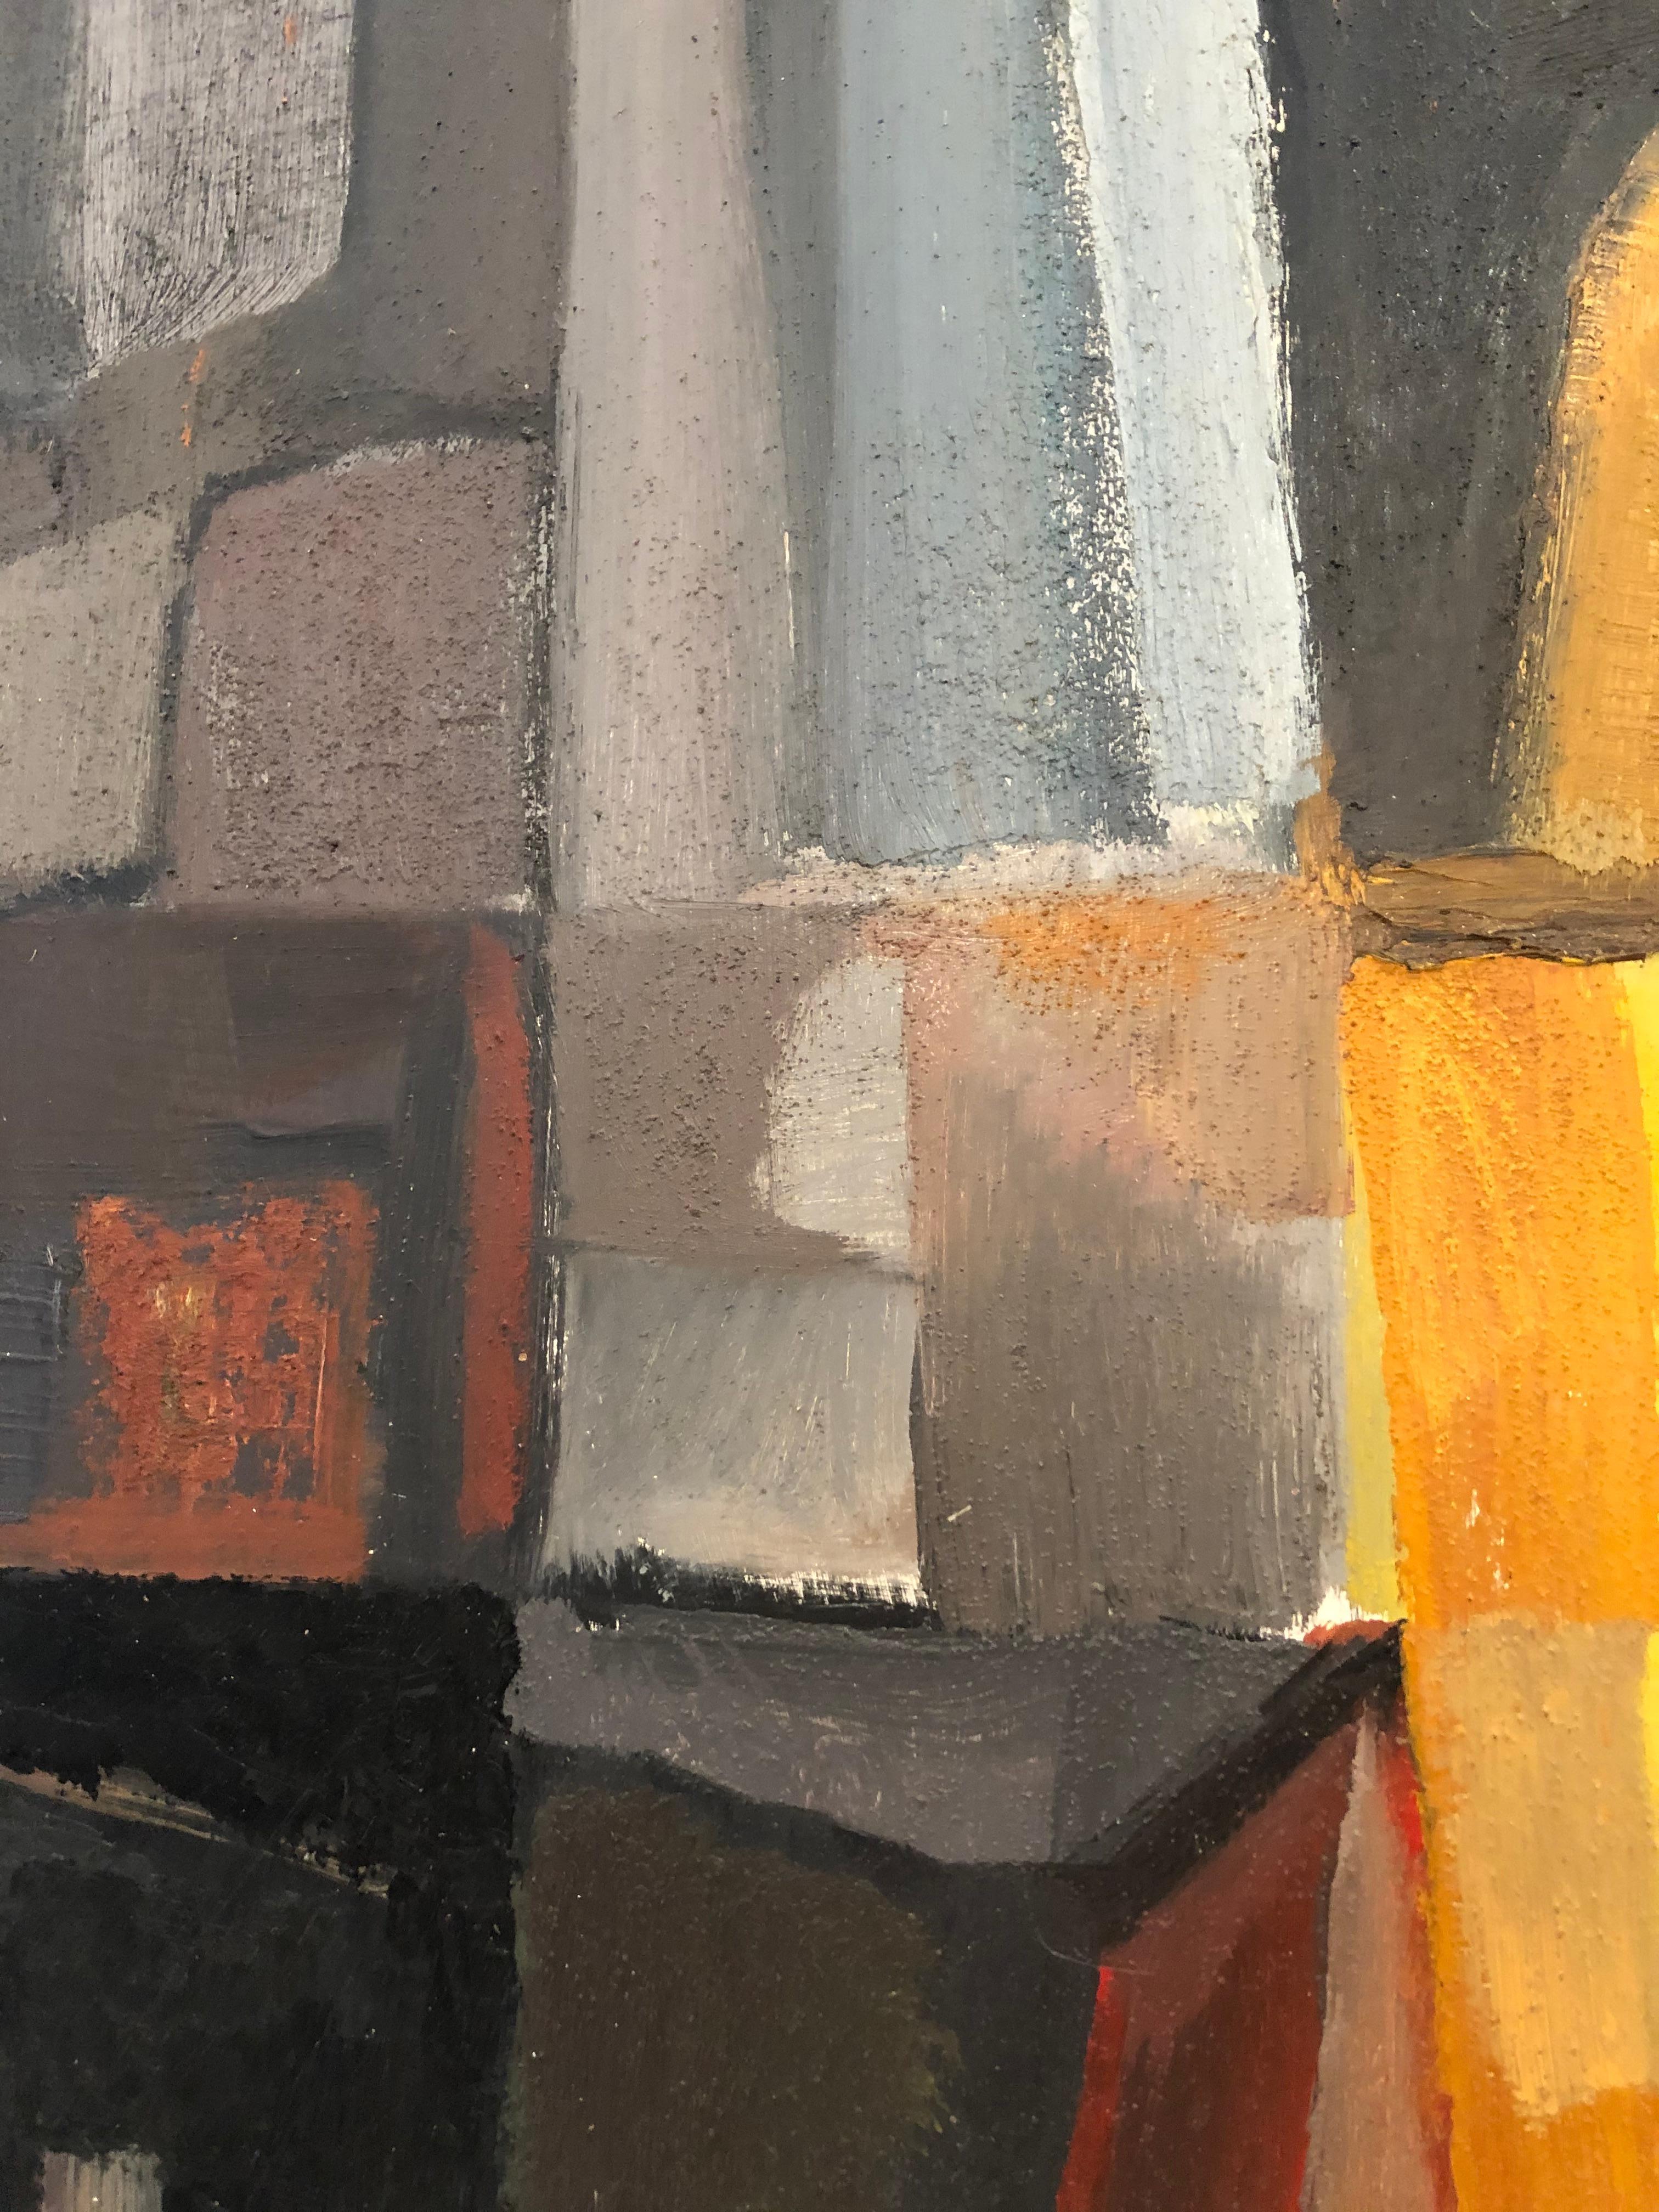 Mid-20th Century Striking Cubist Abstract Painting in Orange, Yellow, Grey and Black